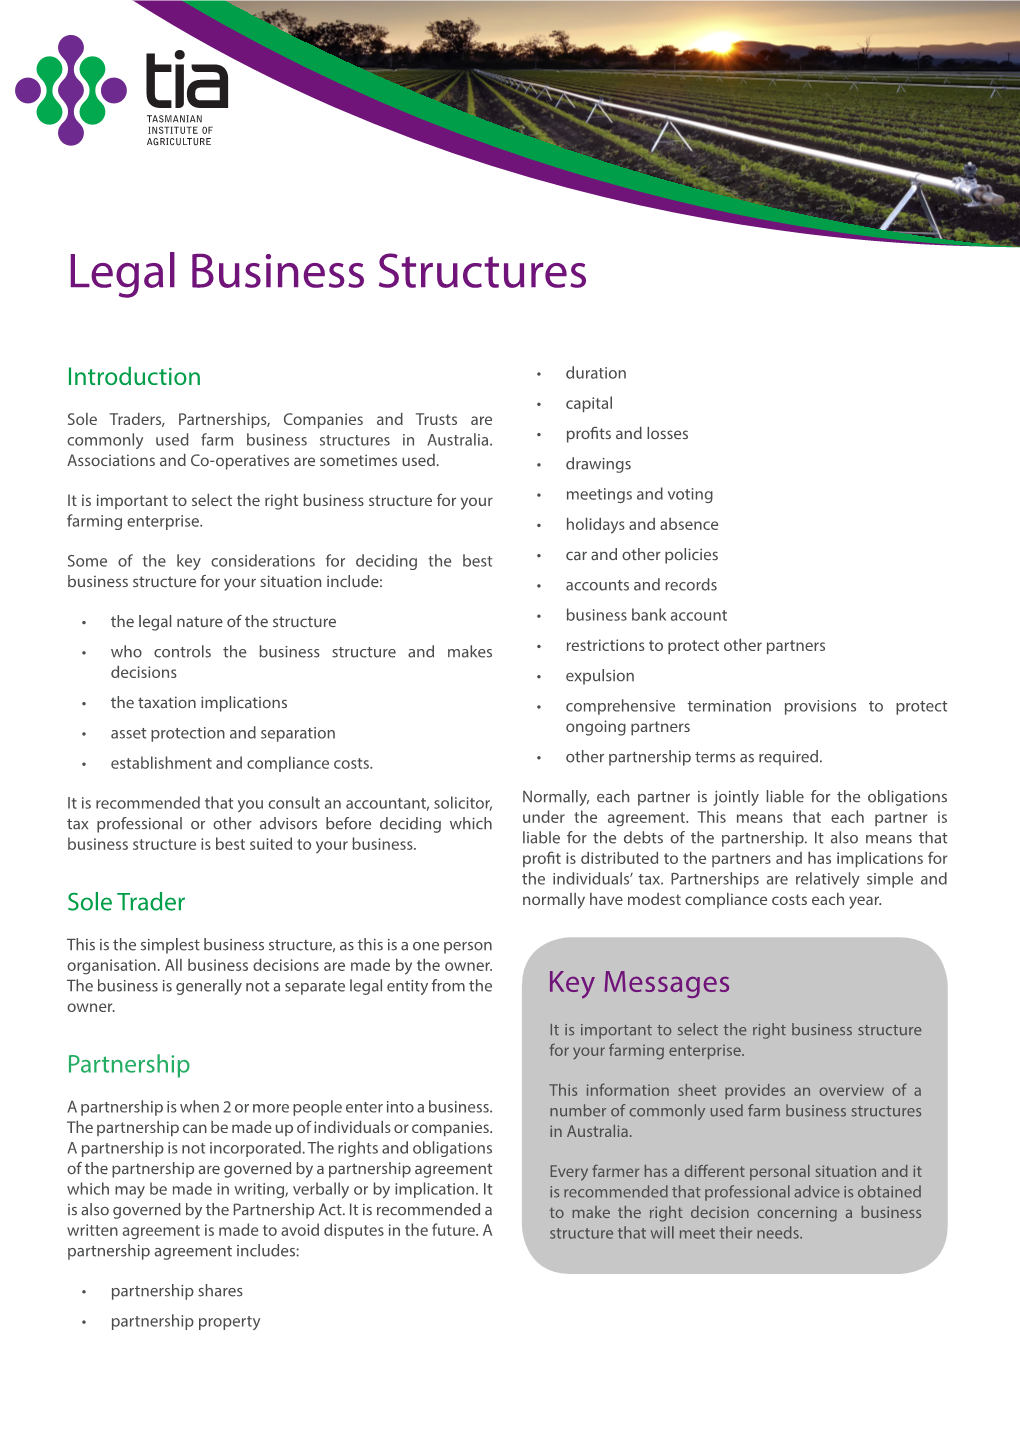 Legal Business Structures